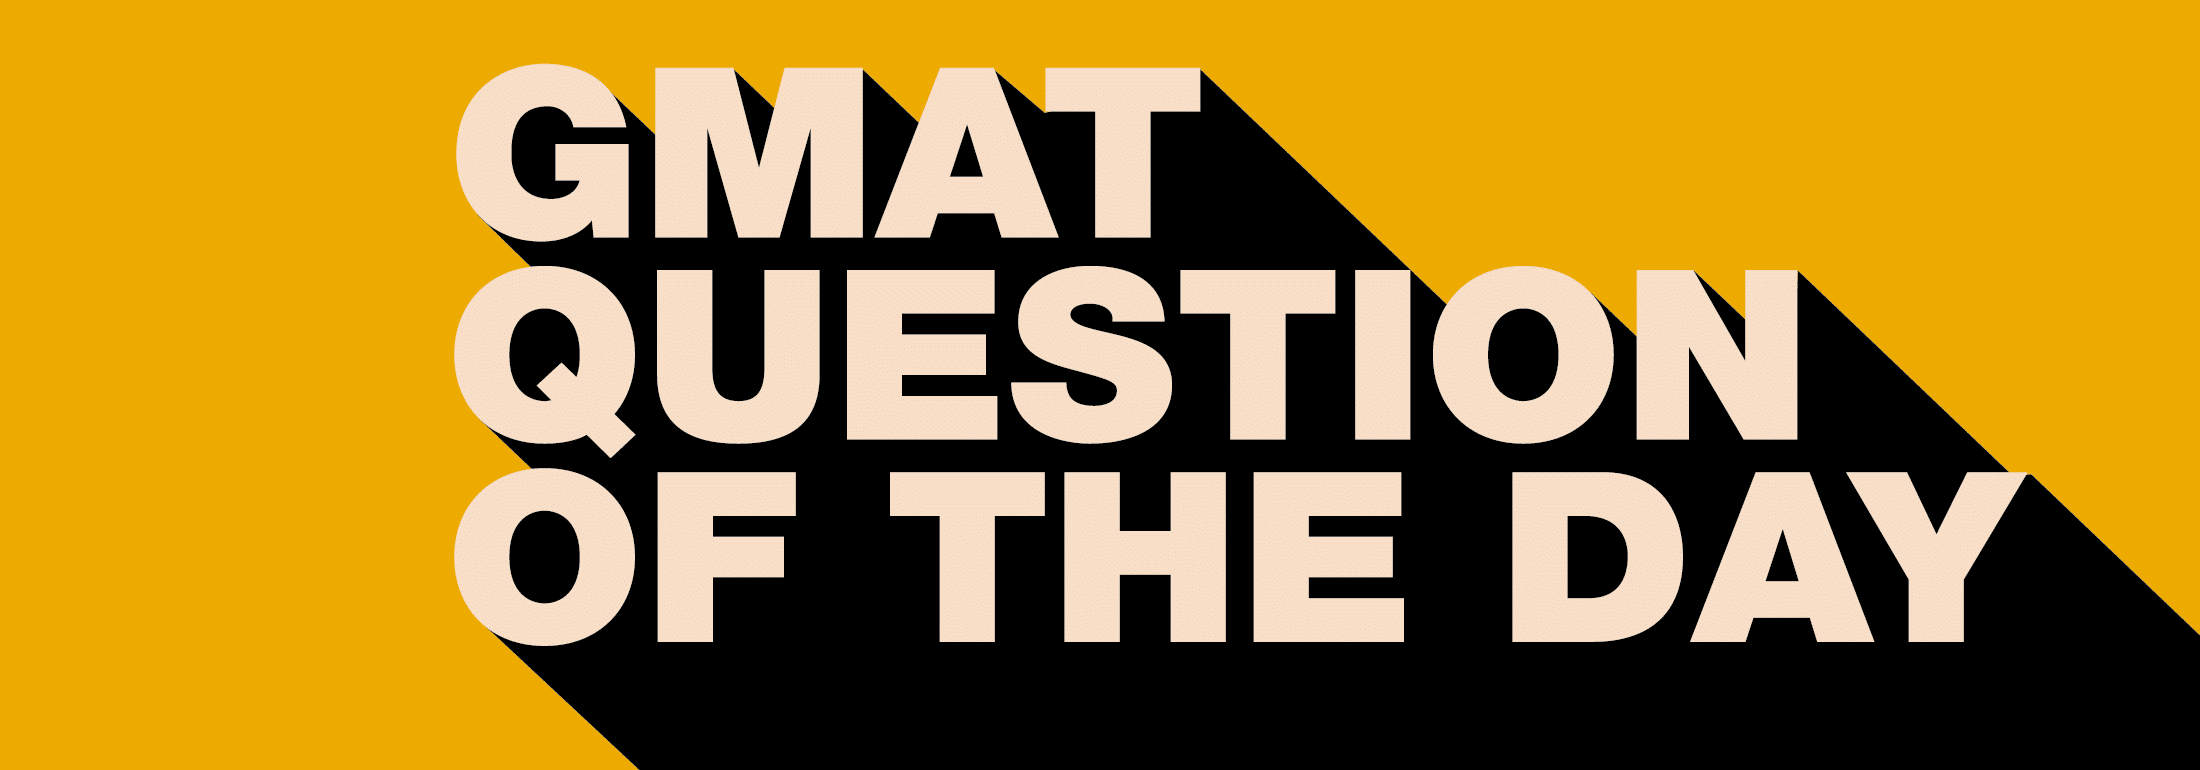 GMAT Question of the Day Absolute Value